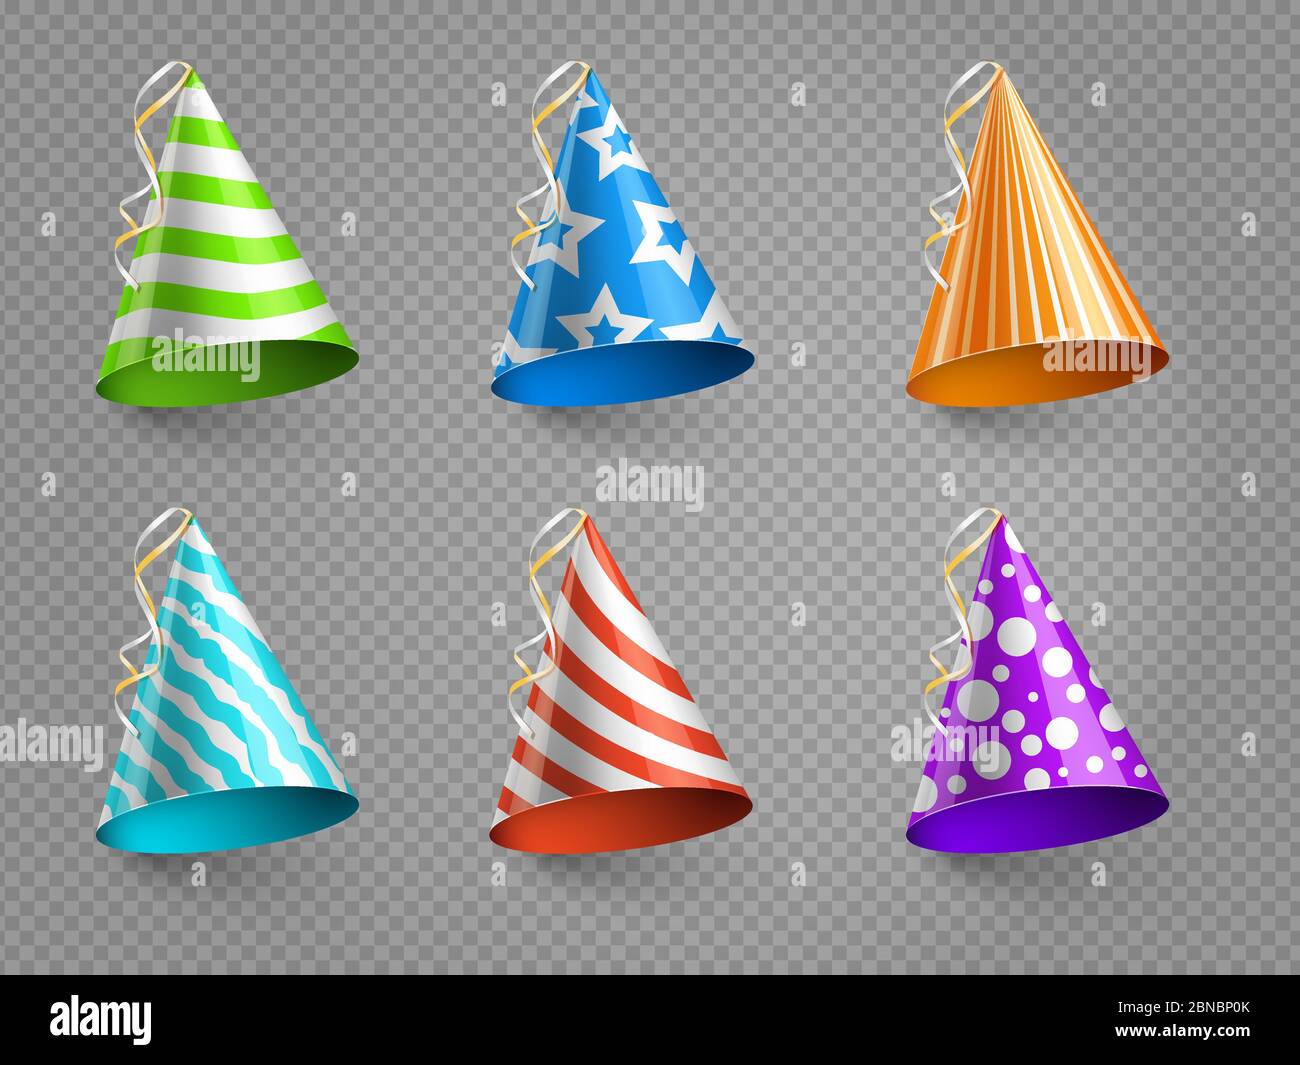 Realistic party hats vector set isolated on transparent background. Illustration of colored hat for party celebration birthday Stock Vector